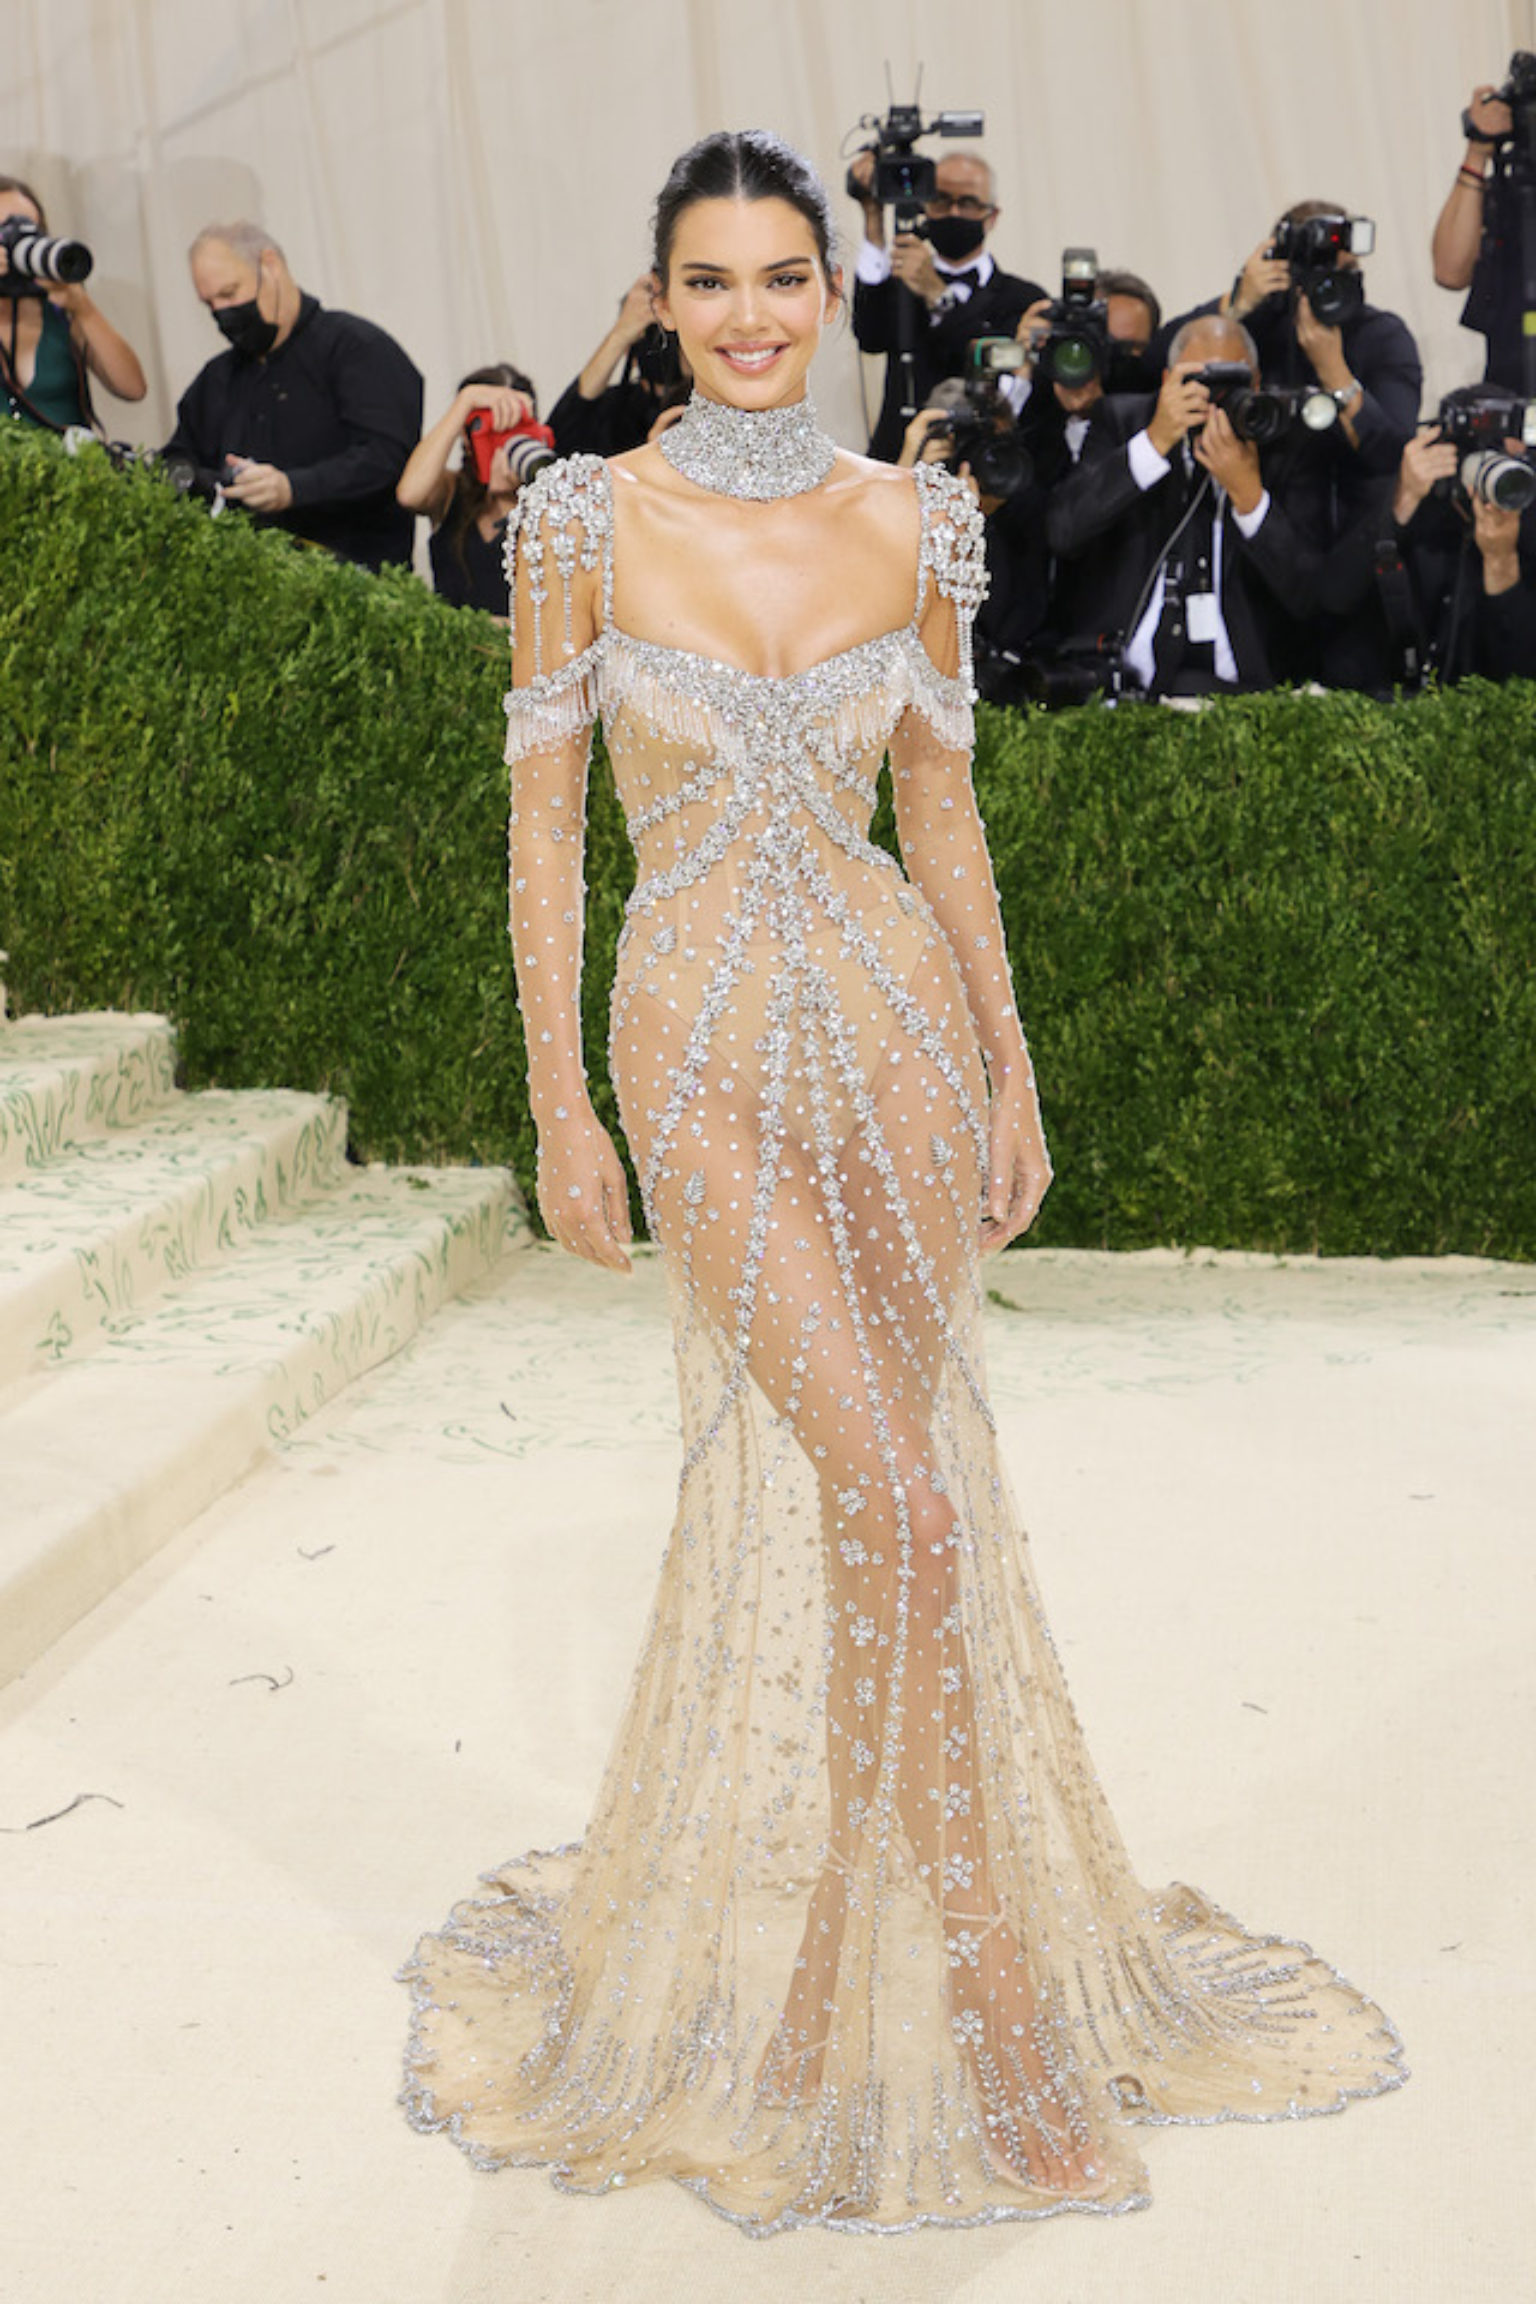 Kendall Jenner Channels ‘My Fair Lady’ At Met Gala In Nearly Nude